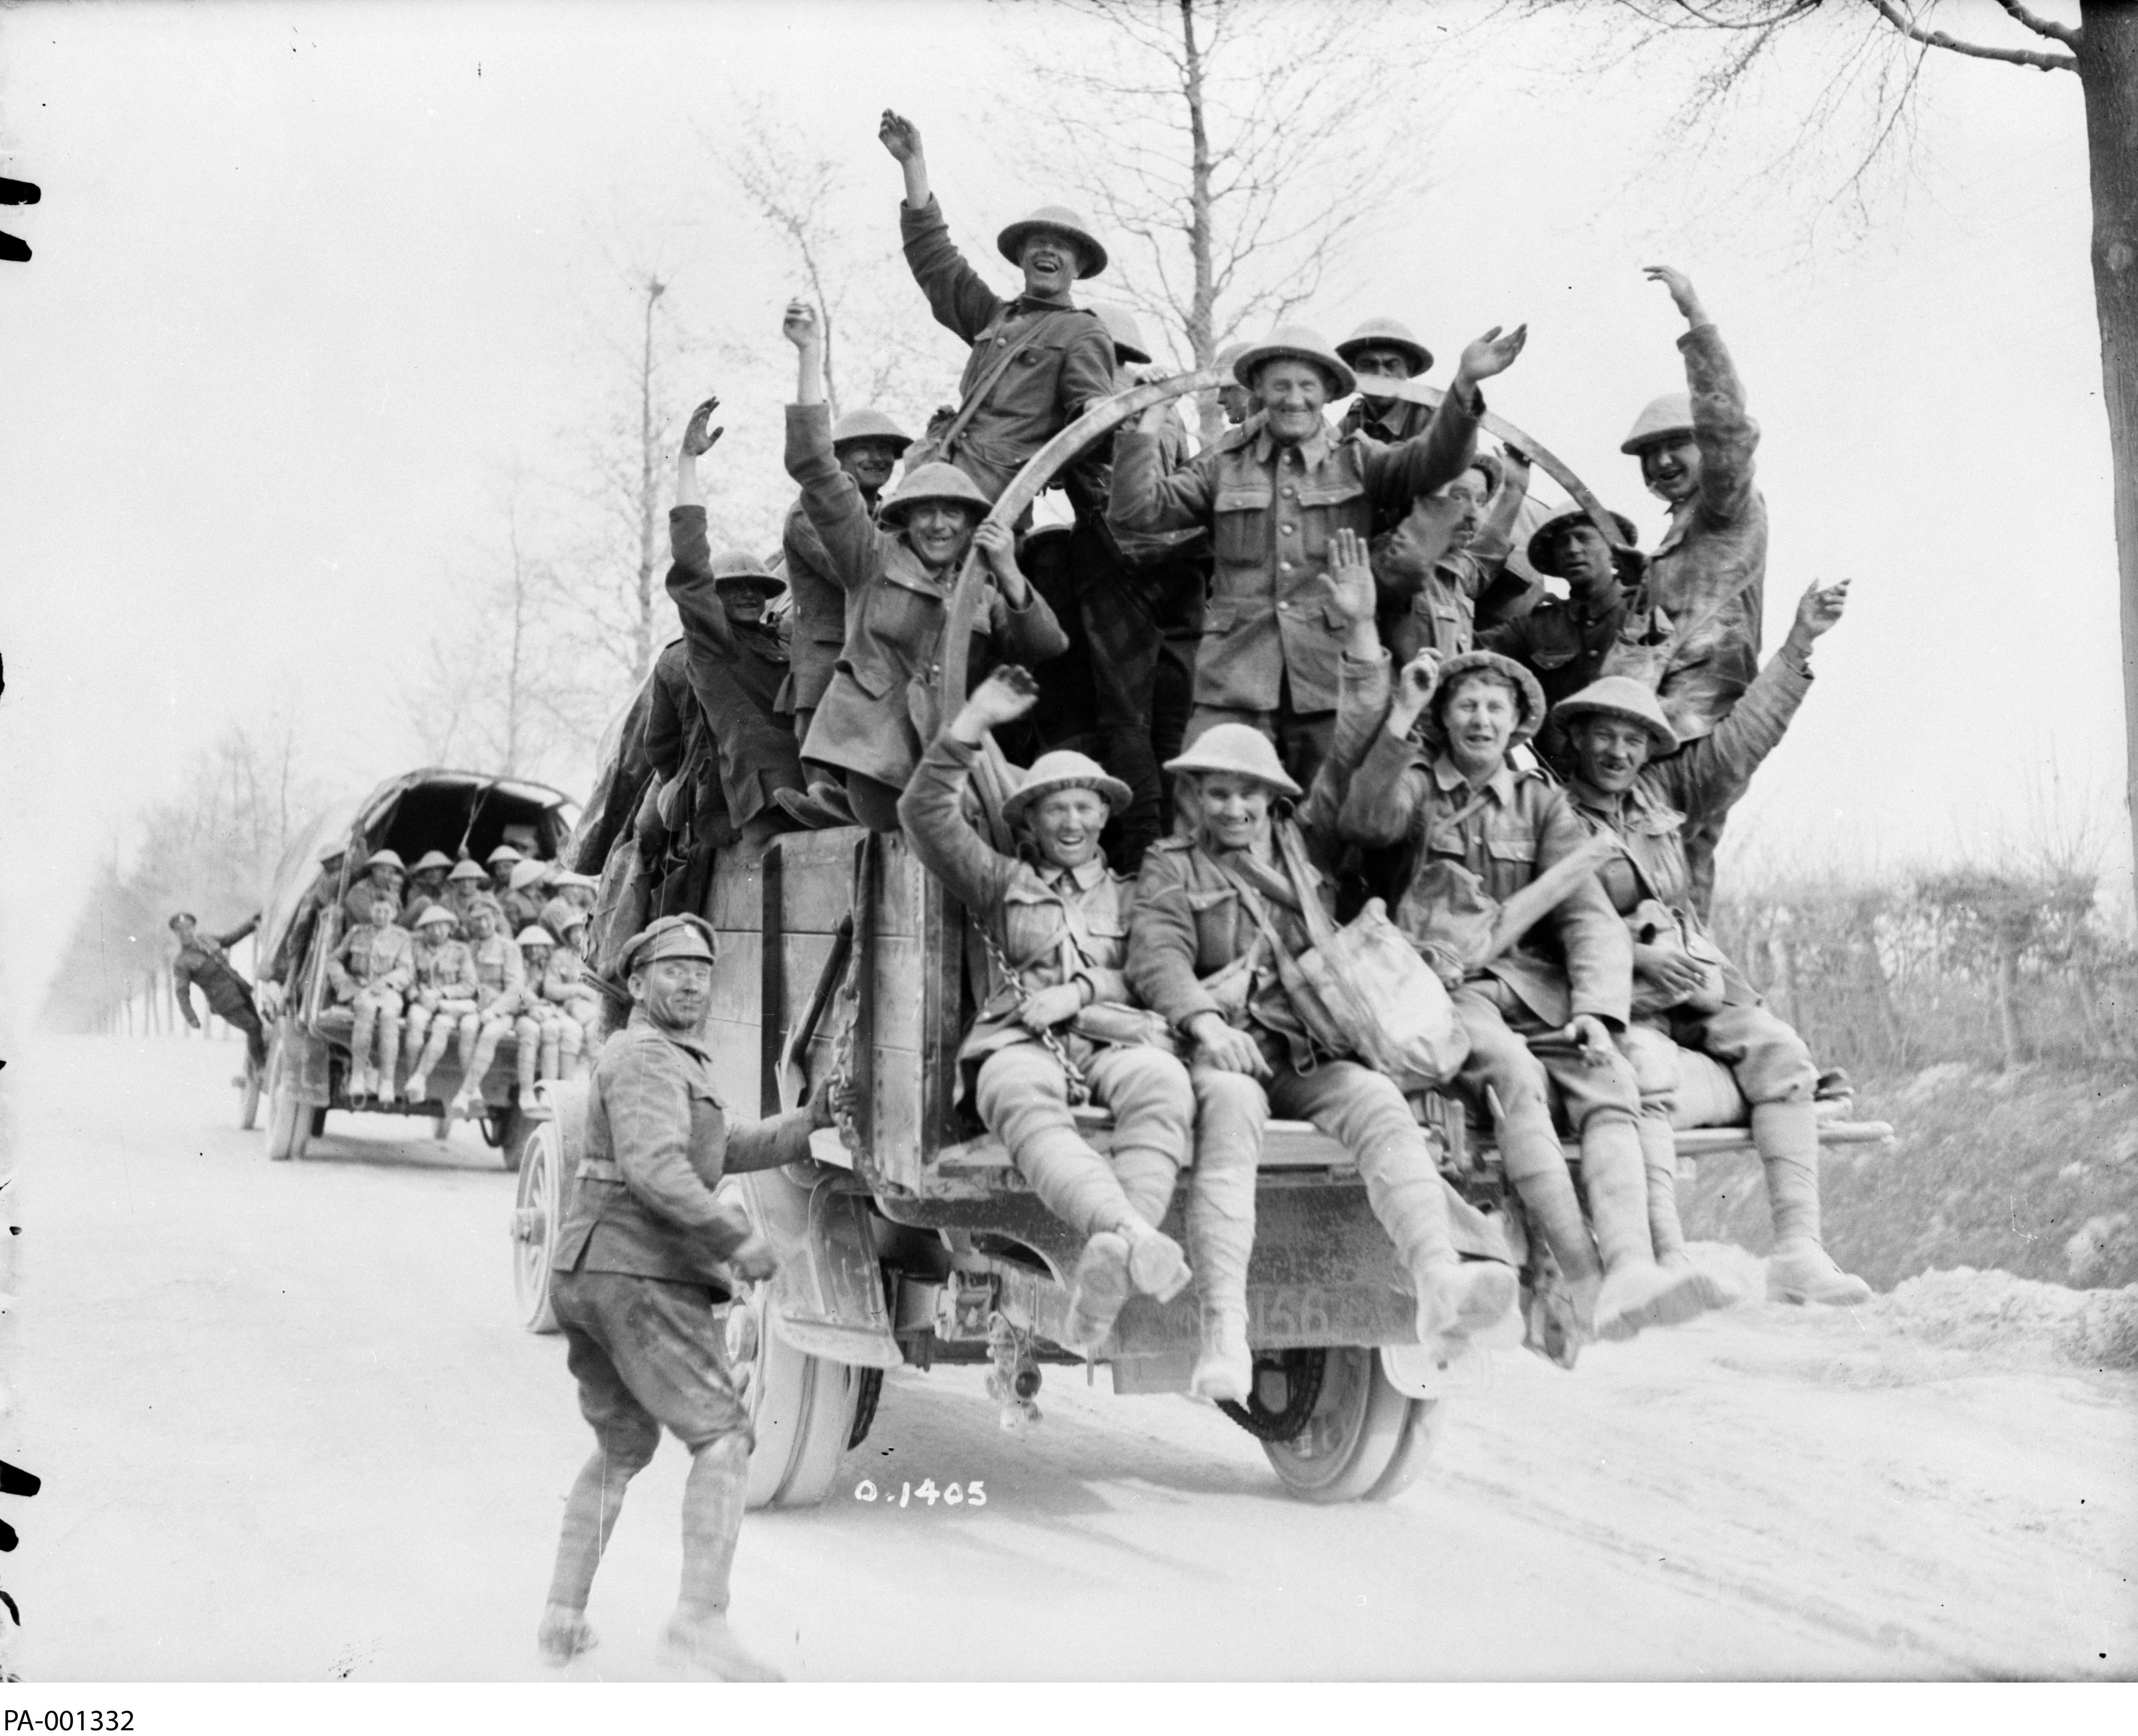 Black and white photograph. Canadian soldiers face the camera; they are all seated on the back of the truck, one soldier is just about to climb on. They appear happy and are waving. Another truck is visible in the distance, similarly loaded with soldiers.